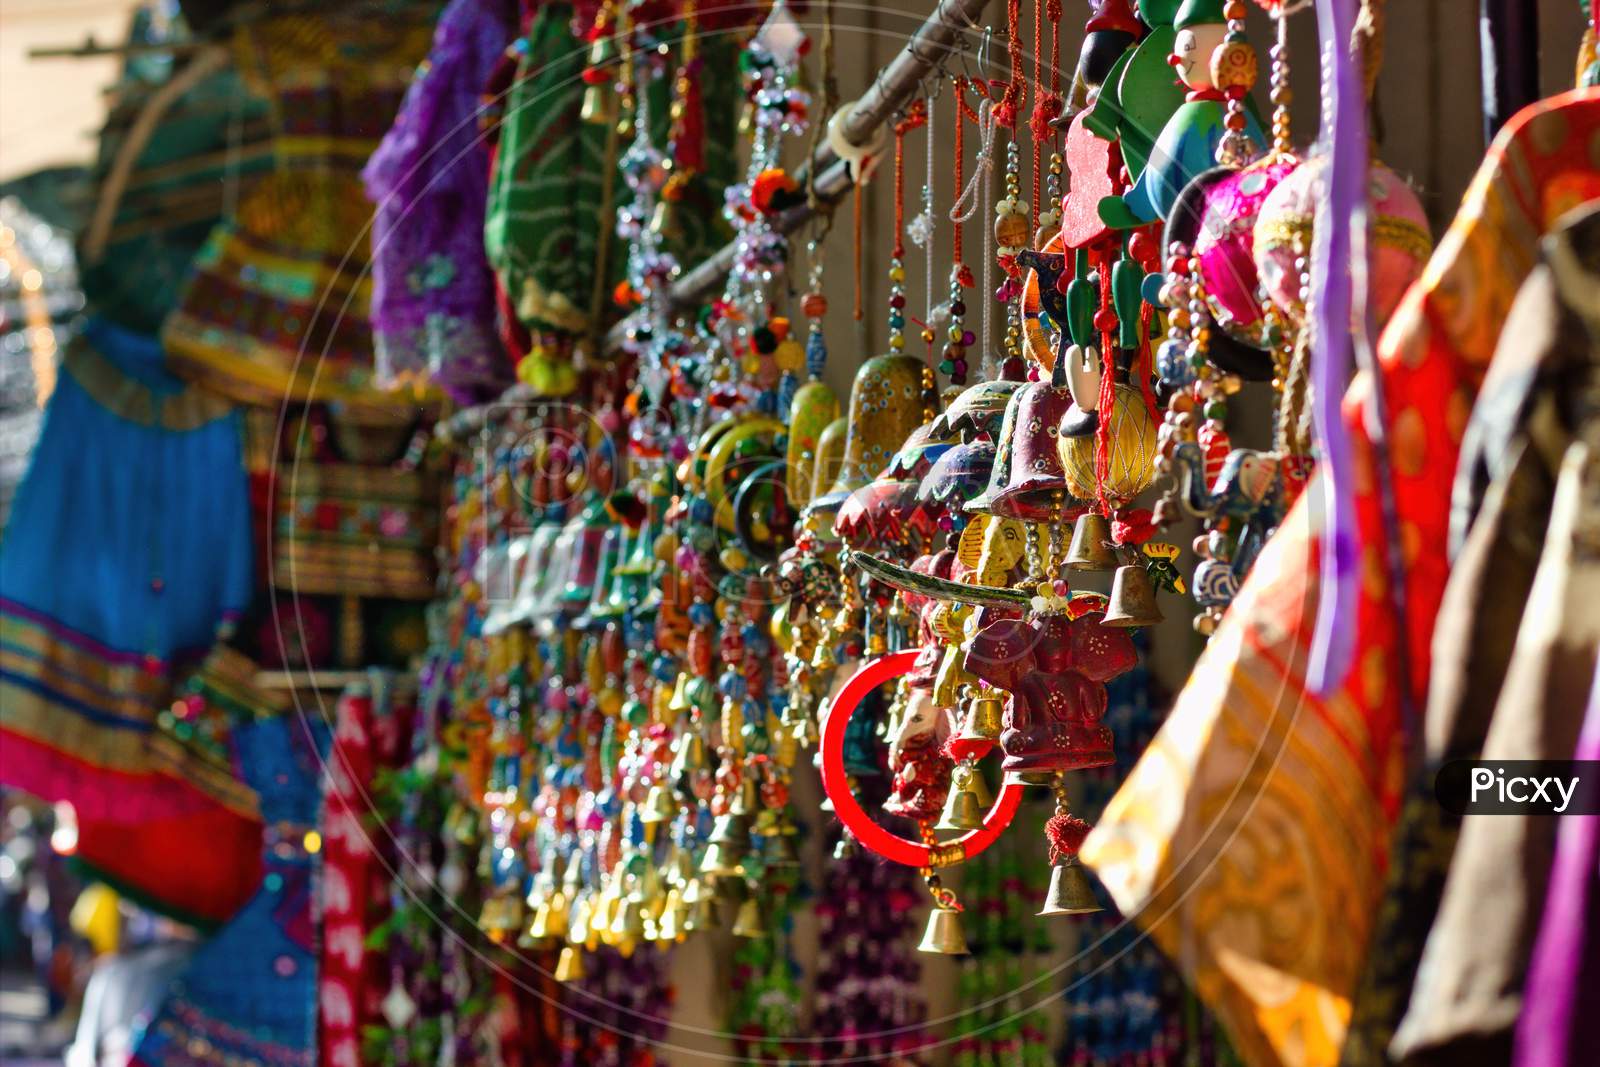 Bunch Of Colorful Decorative Item As Souvenir Being Hanging As Display For Sale In The Commercial Street Of Pushkar Fair In The State Of Rajasthan